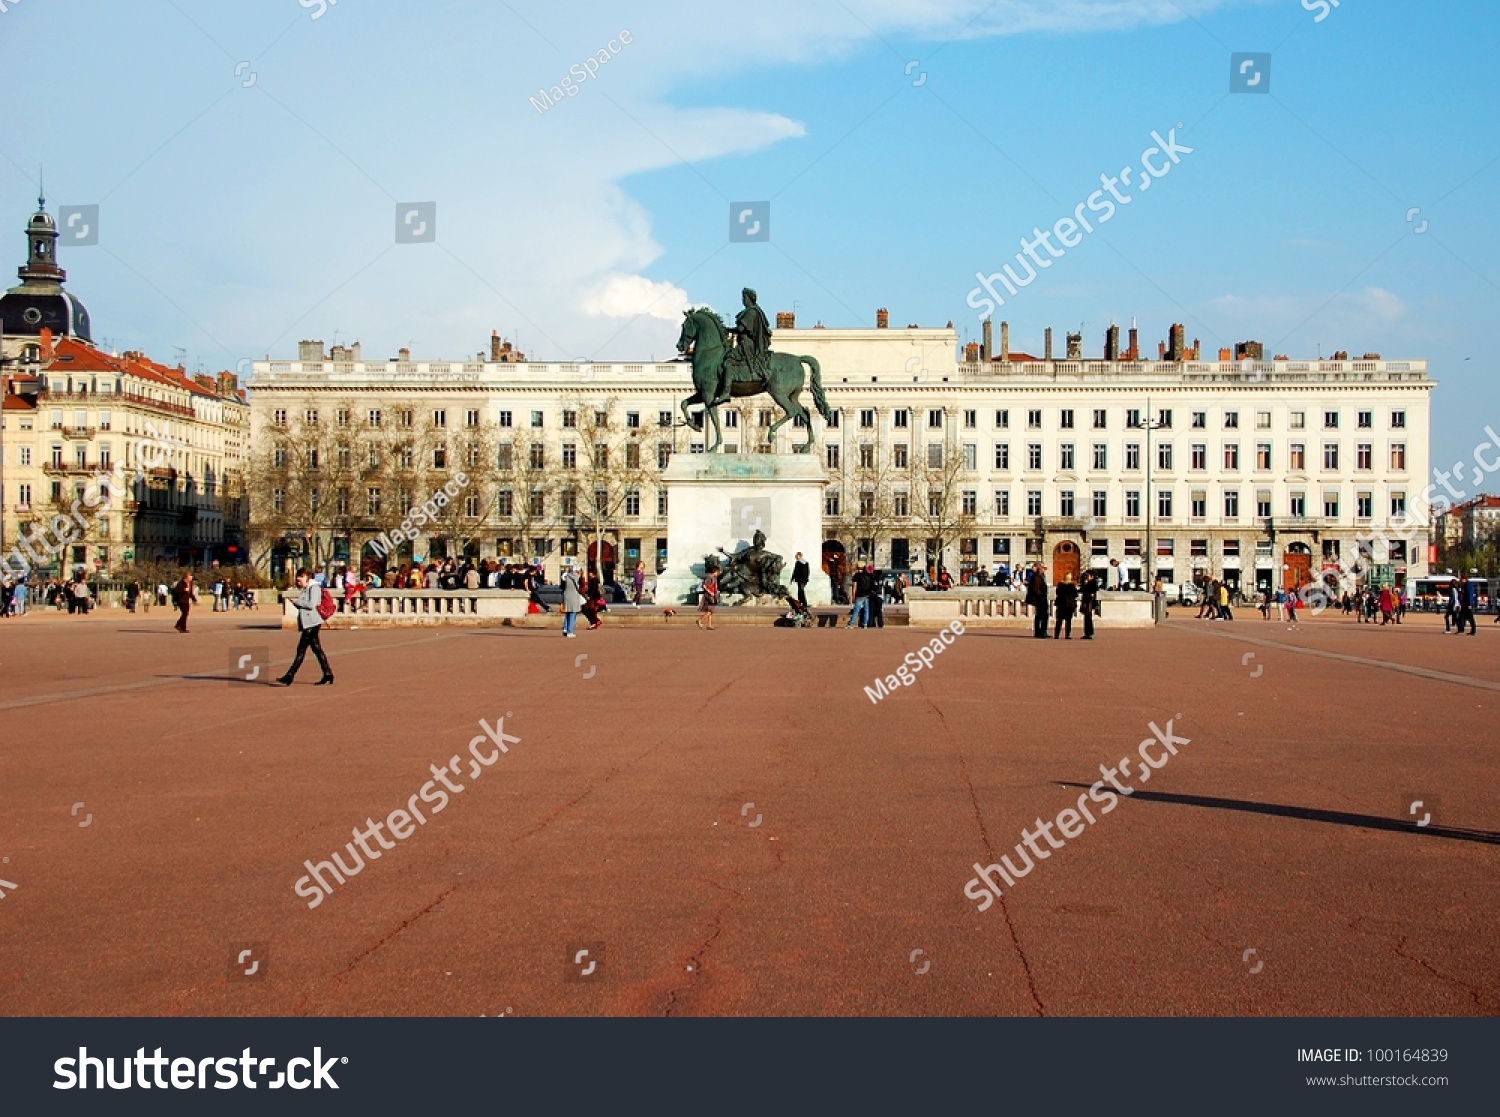 The Bellecour square in Lyon. Statue of Louis XIV. France This is the central square of city of Lyon